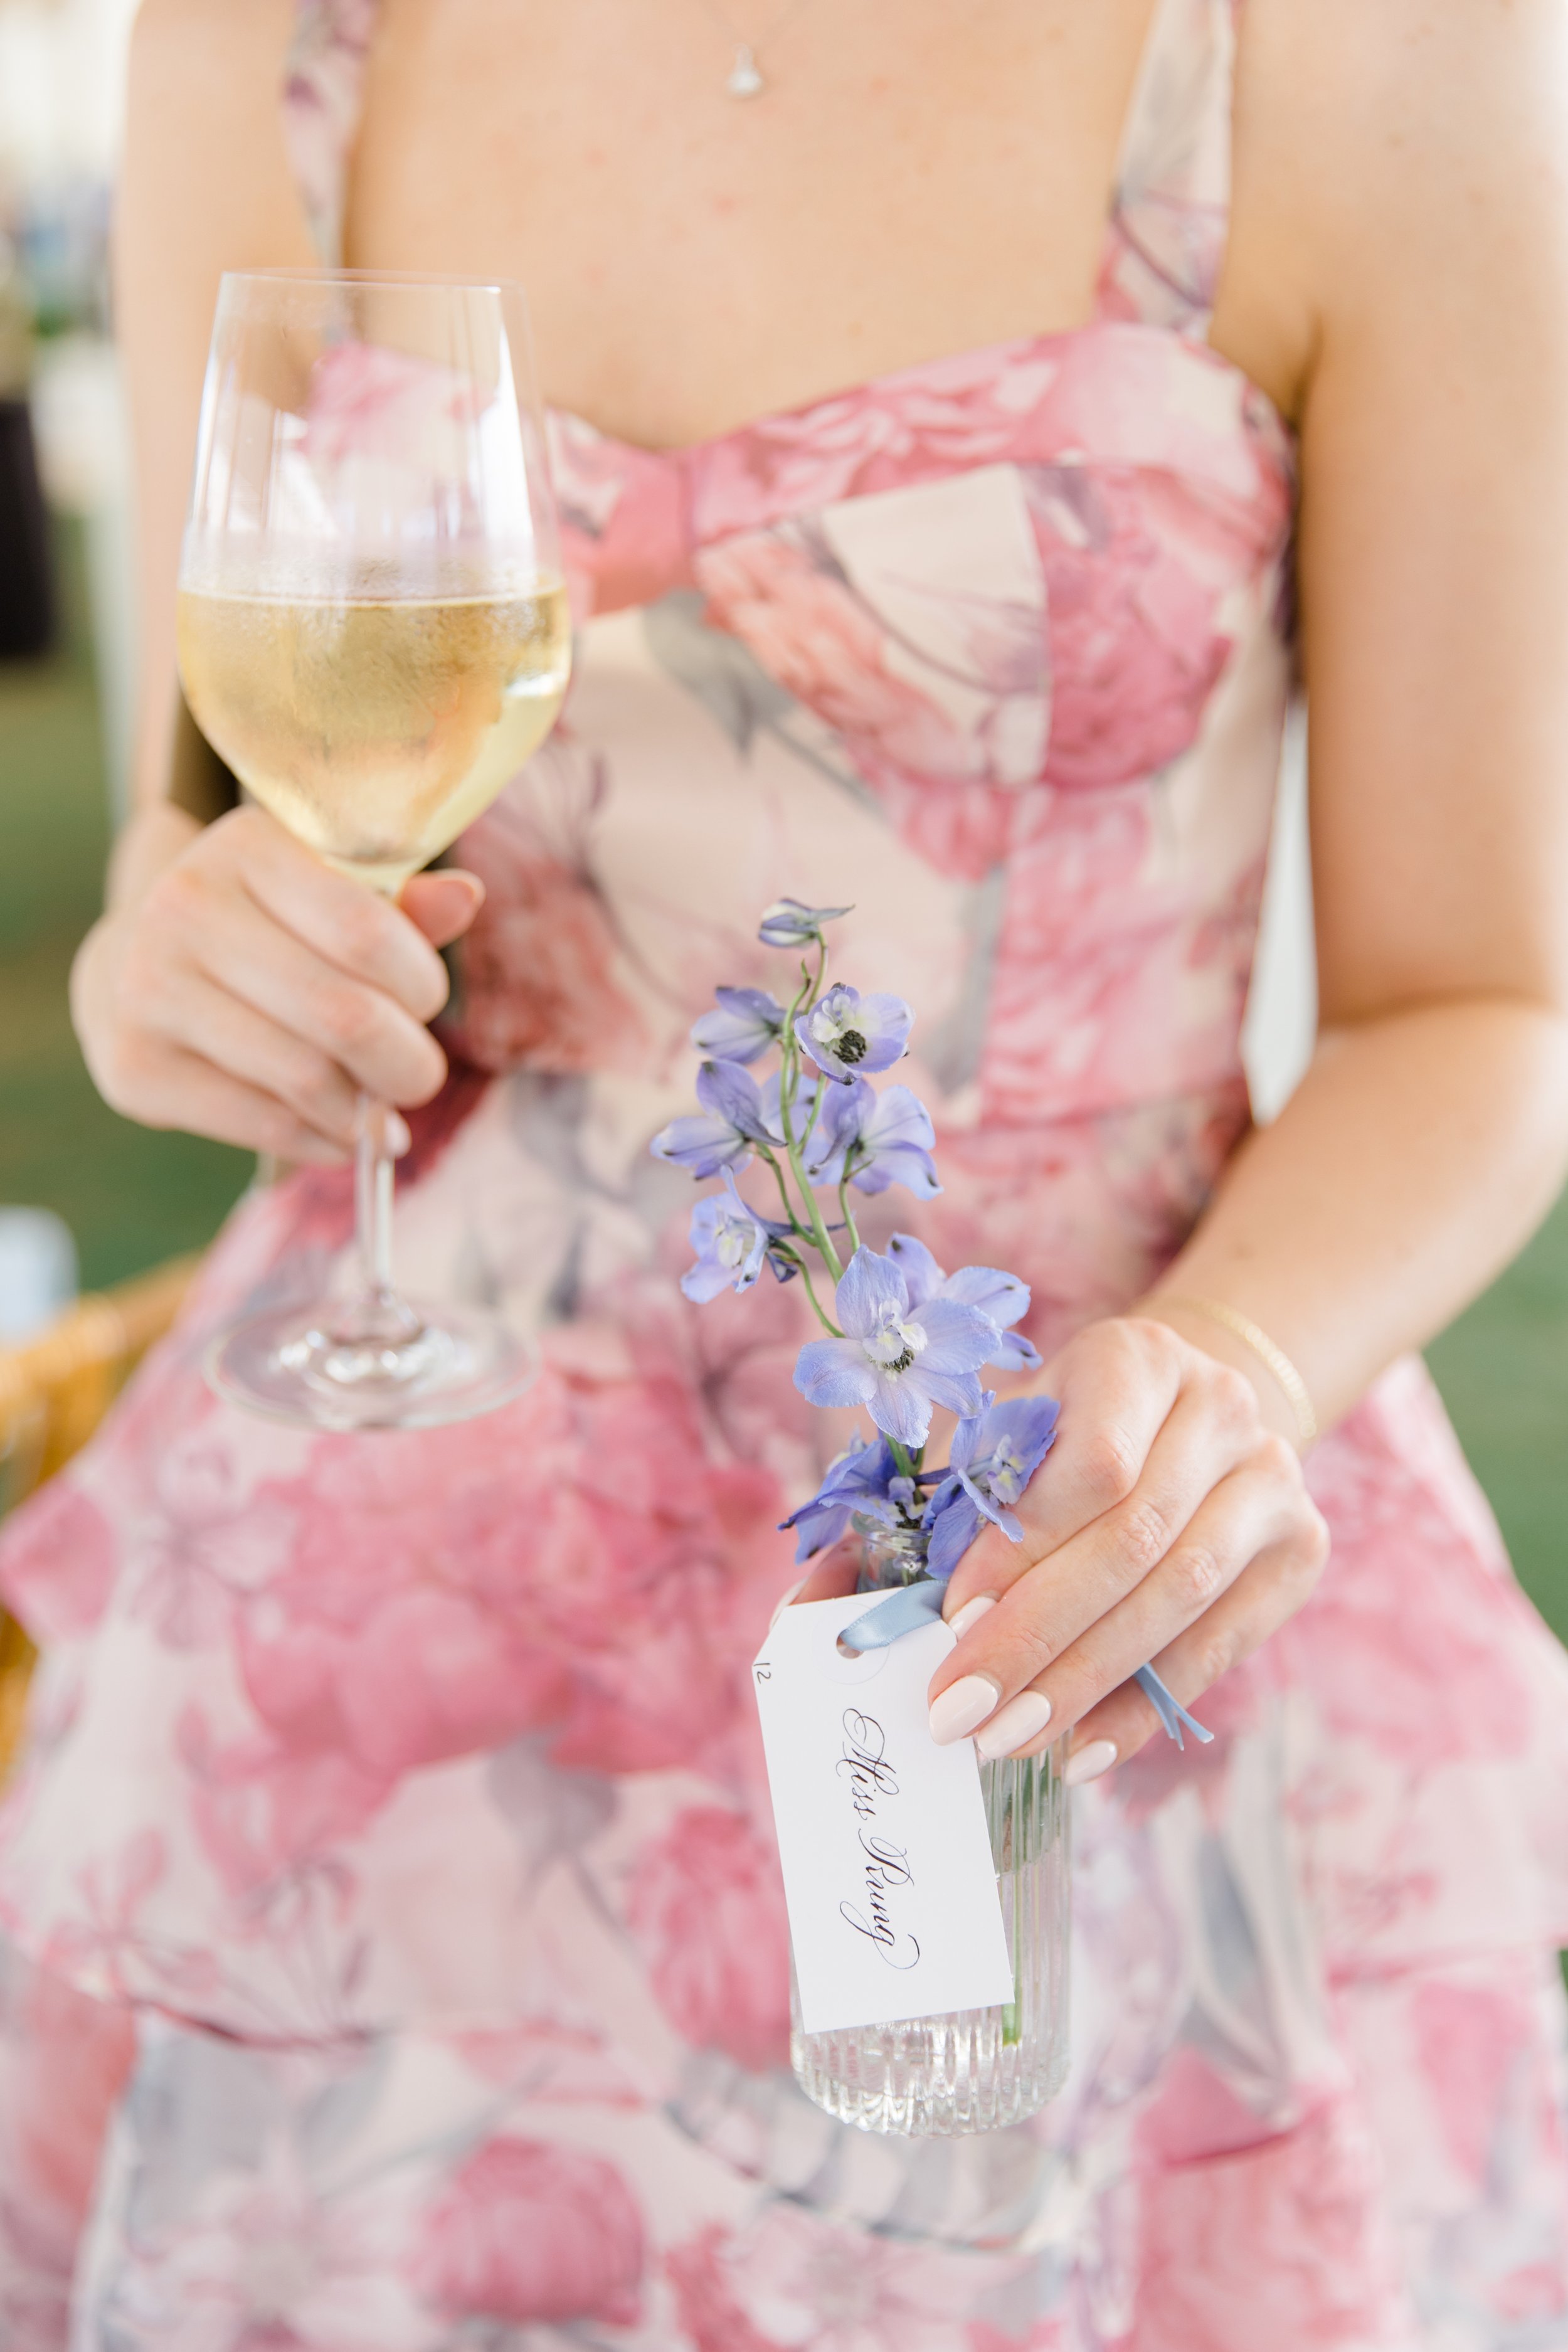 a-southern-chic-south-carolina-wedding-at-the-colleton-river-club-featuring-sophisticated-modern-florals-designed-by-savannah-florist-ivory-and-beau-44.jpg